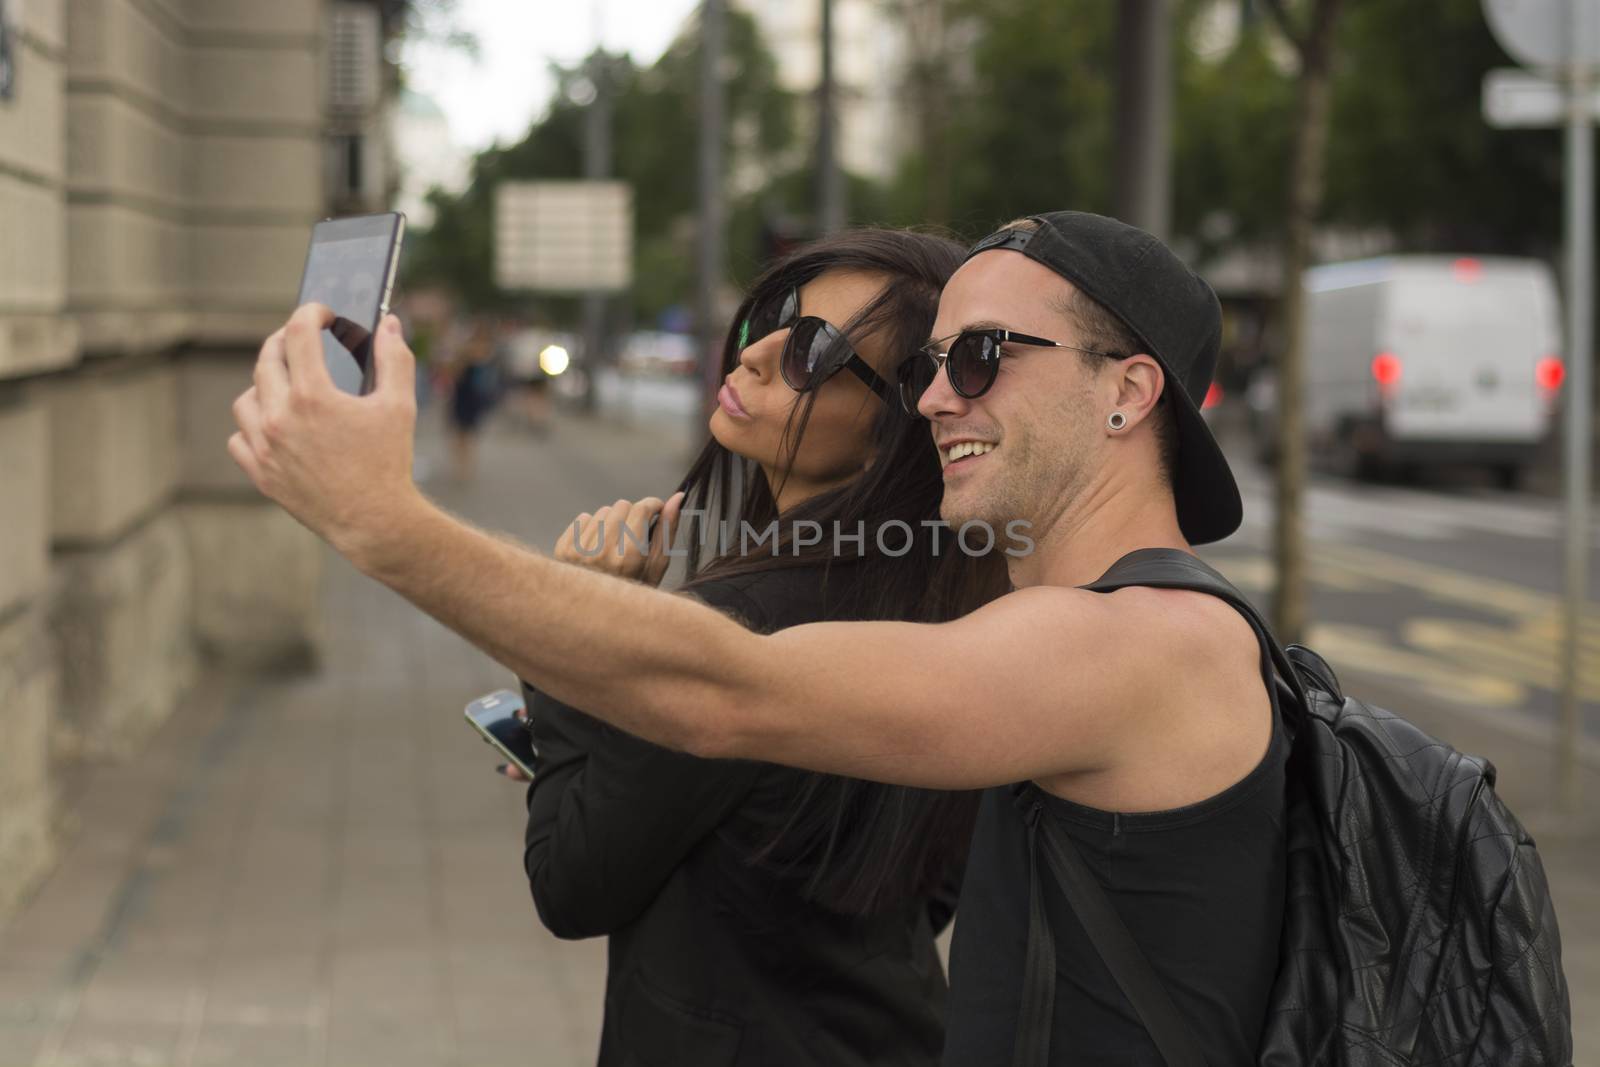 Young cheerful friends taking photos of themselves on smart phone, urban city outdoor scene, selective focus